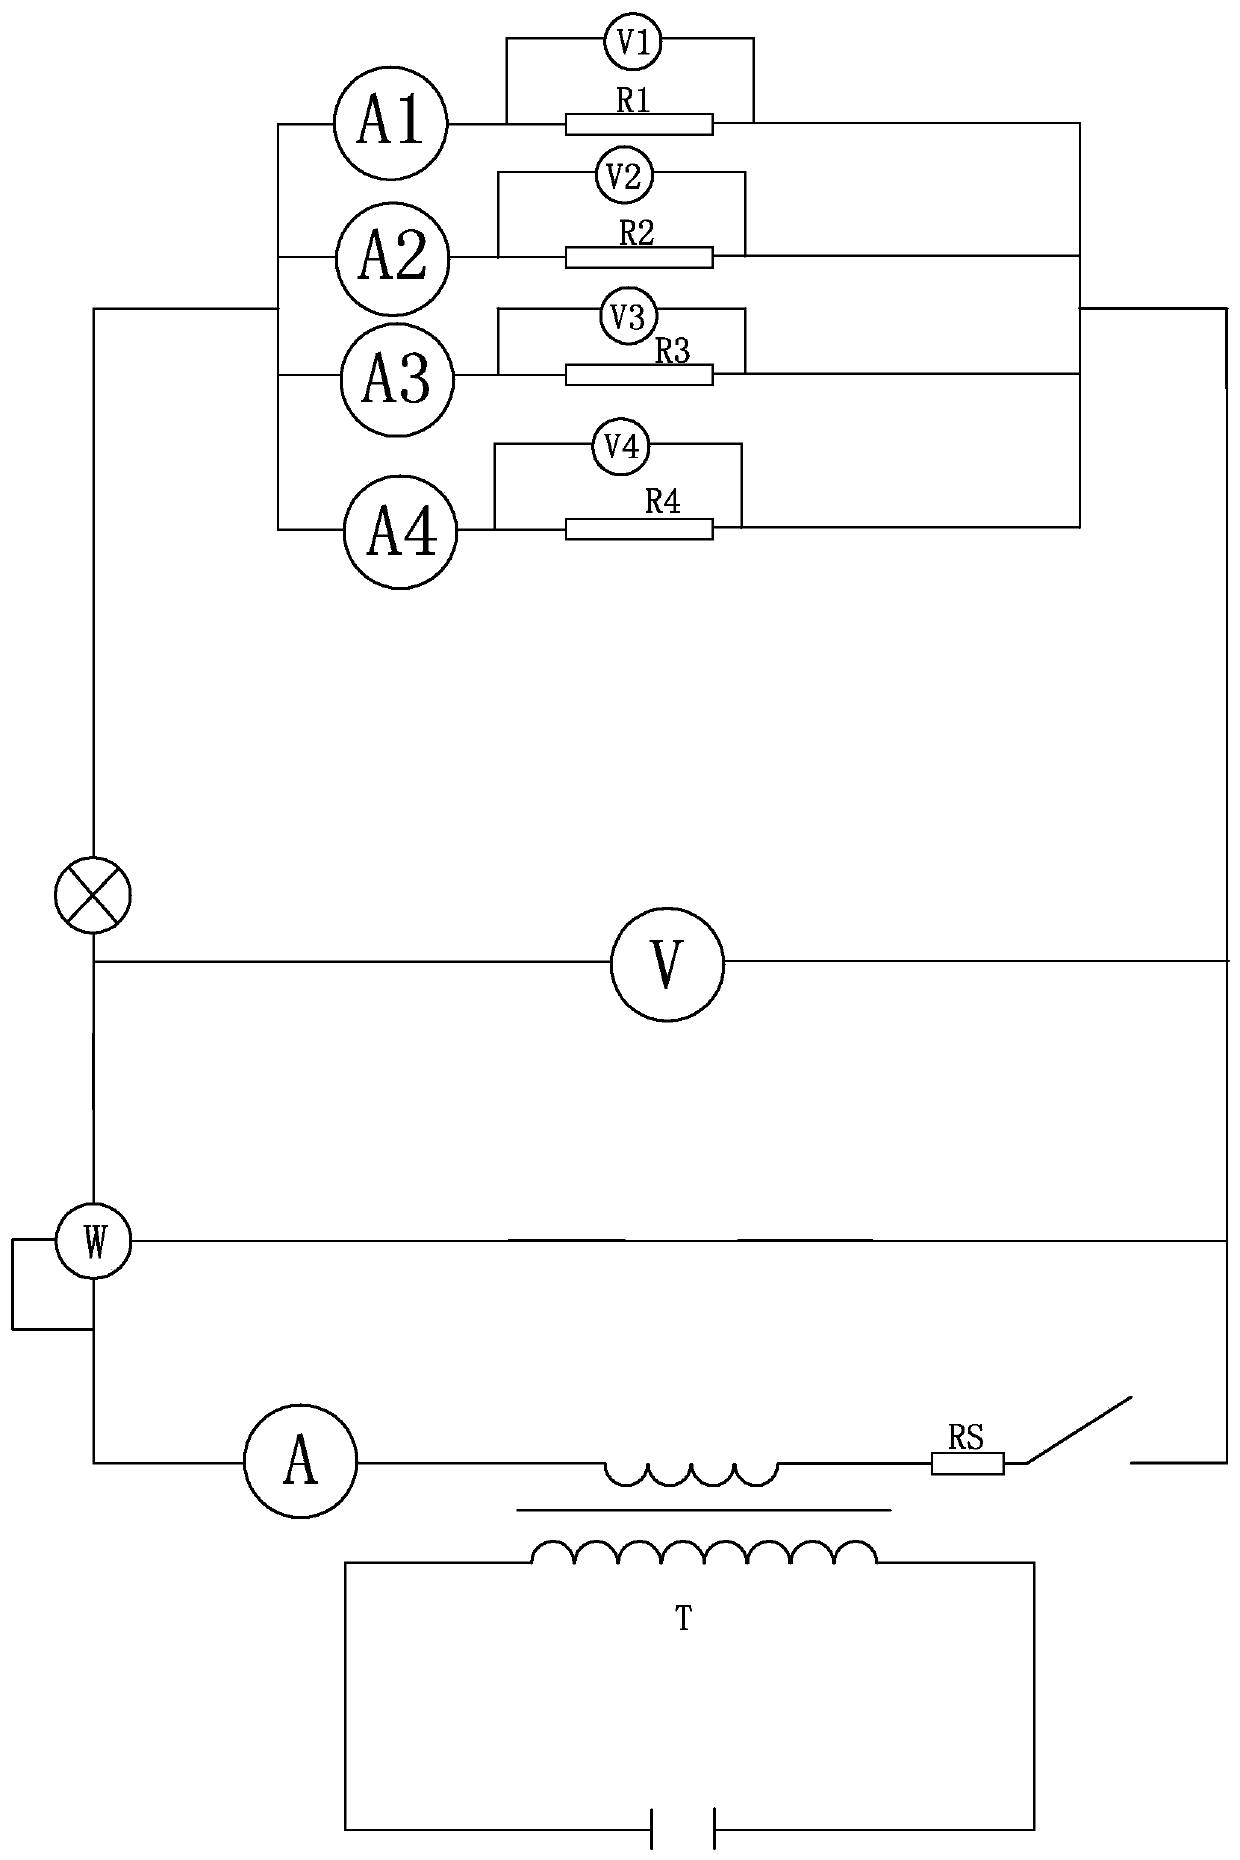 Circuit teaching experiment device for series or parallel connection of resistors